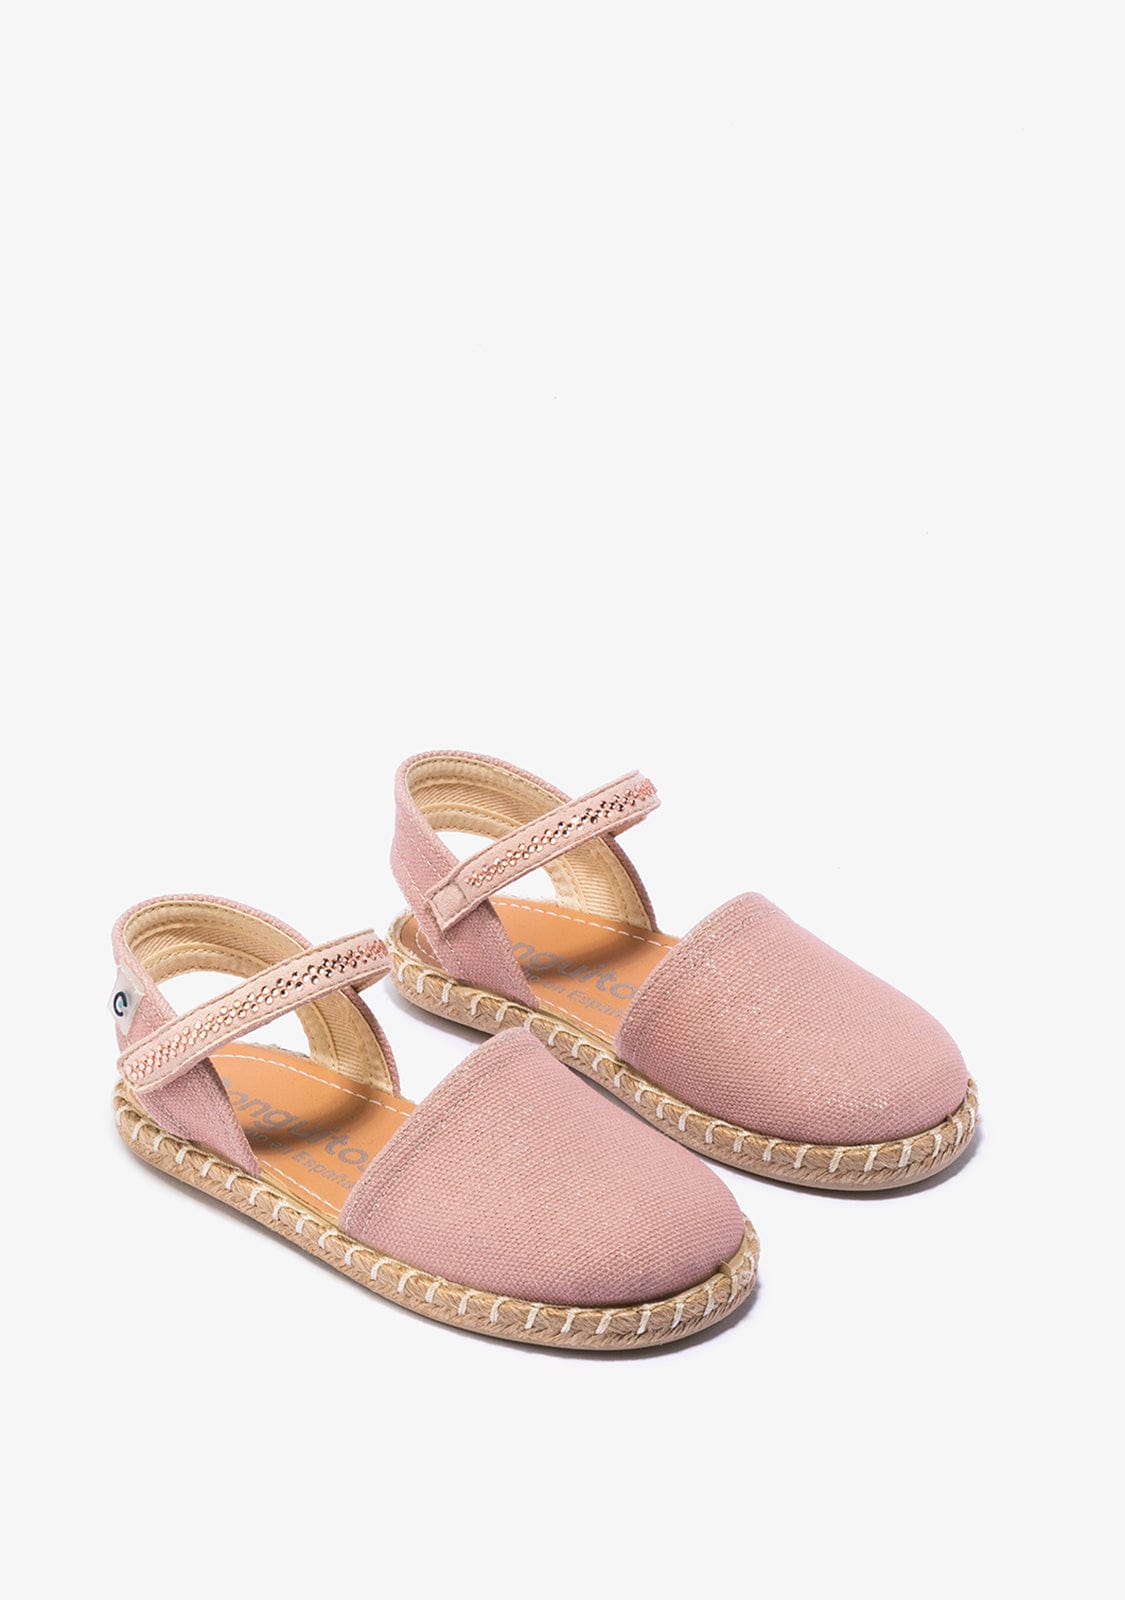 CONGUITOS Shoes Girl's Pink Espadrilles Metallized